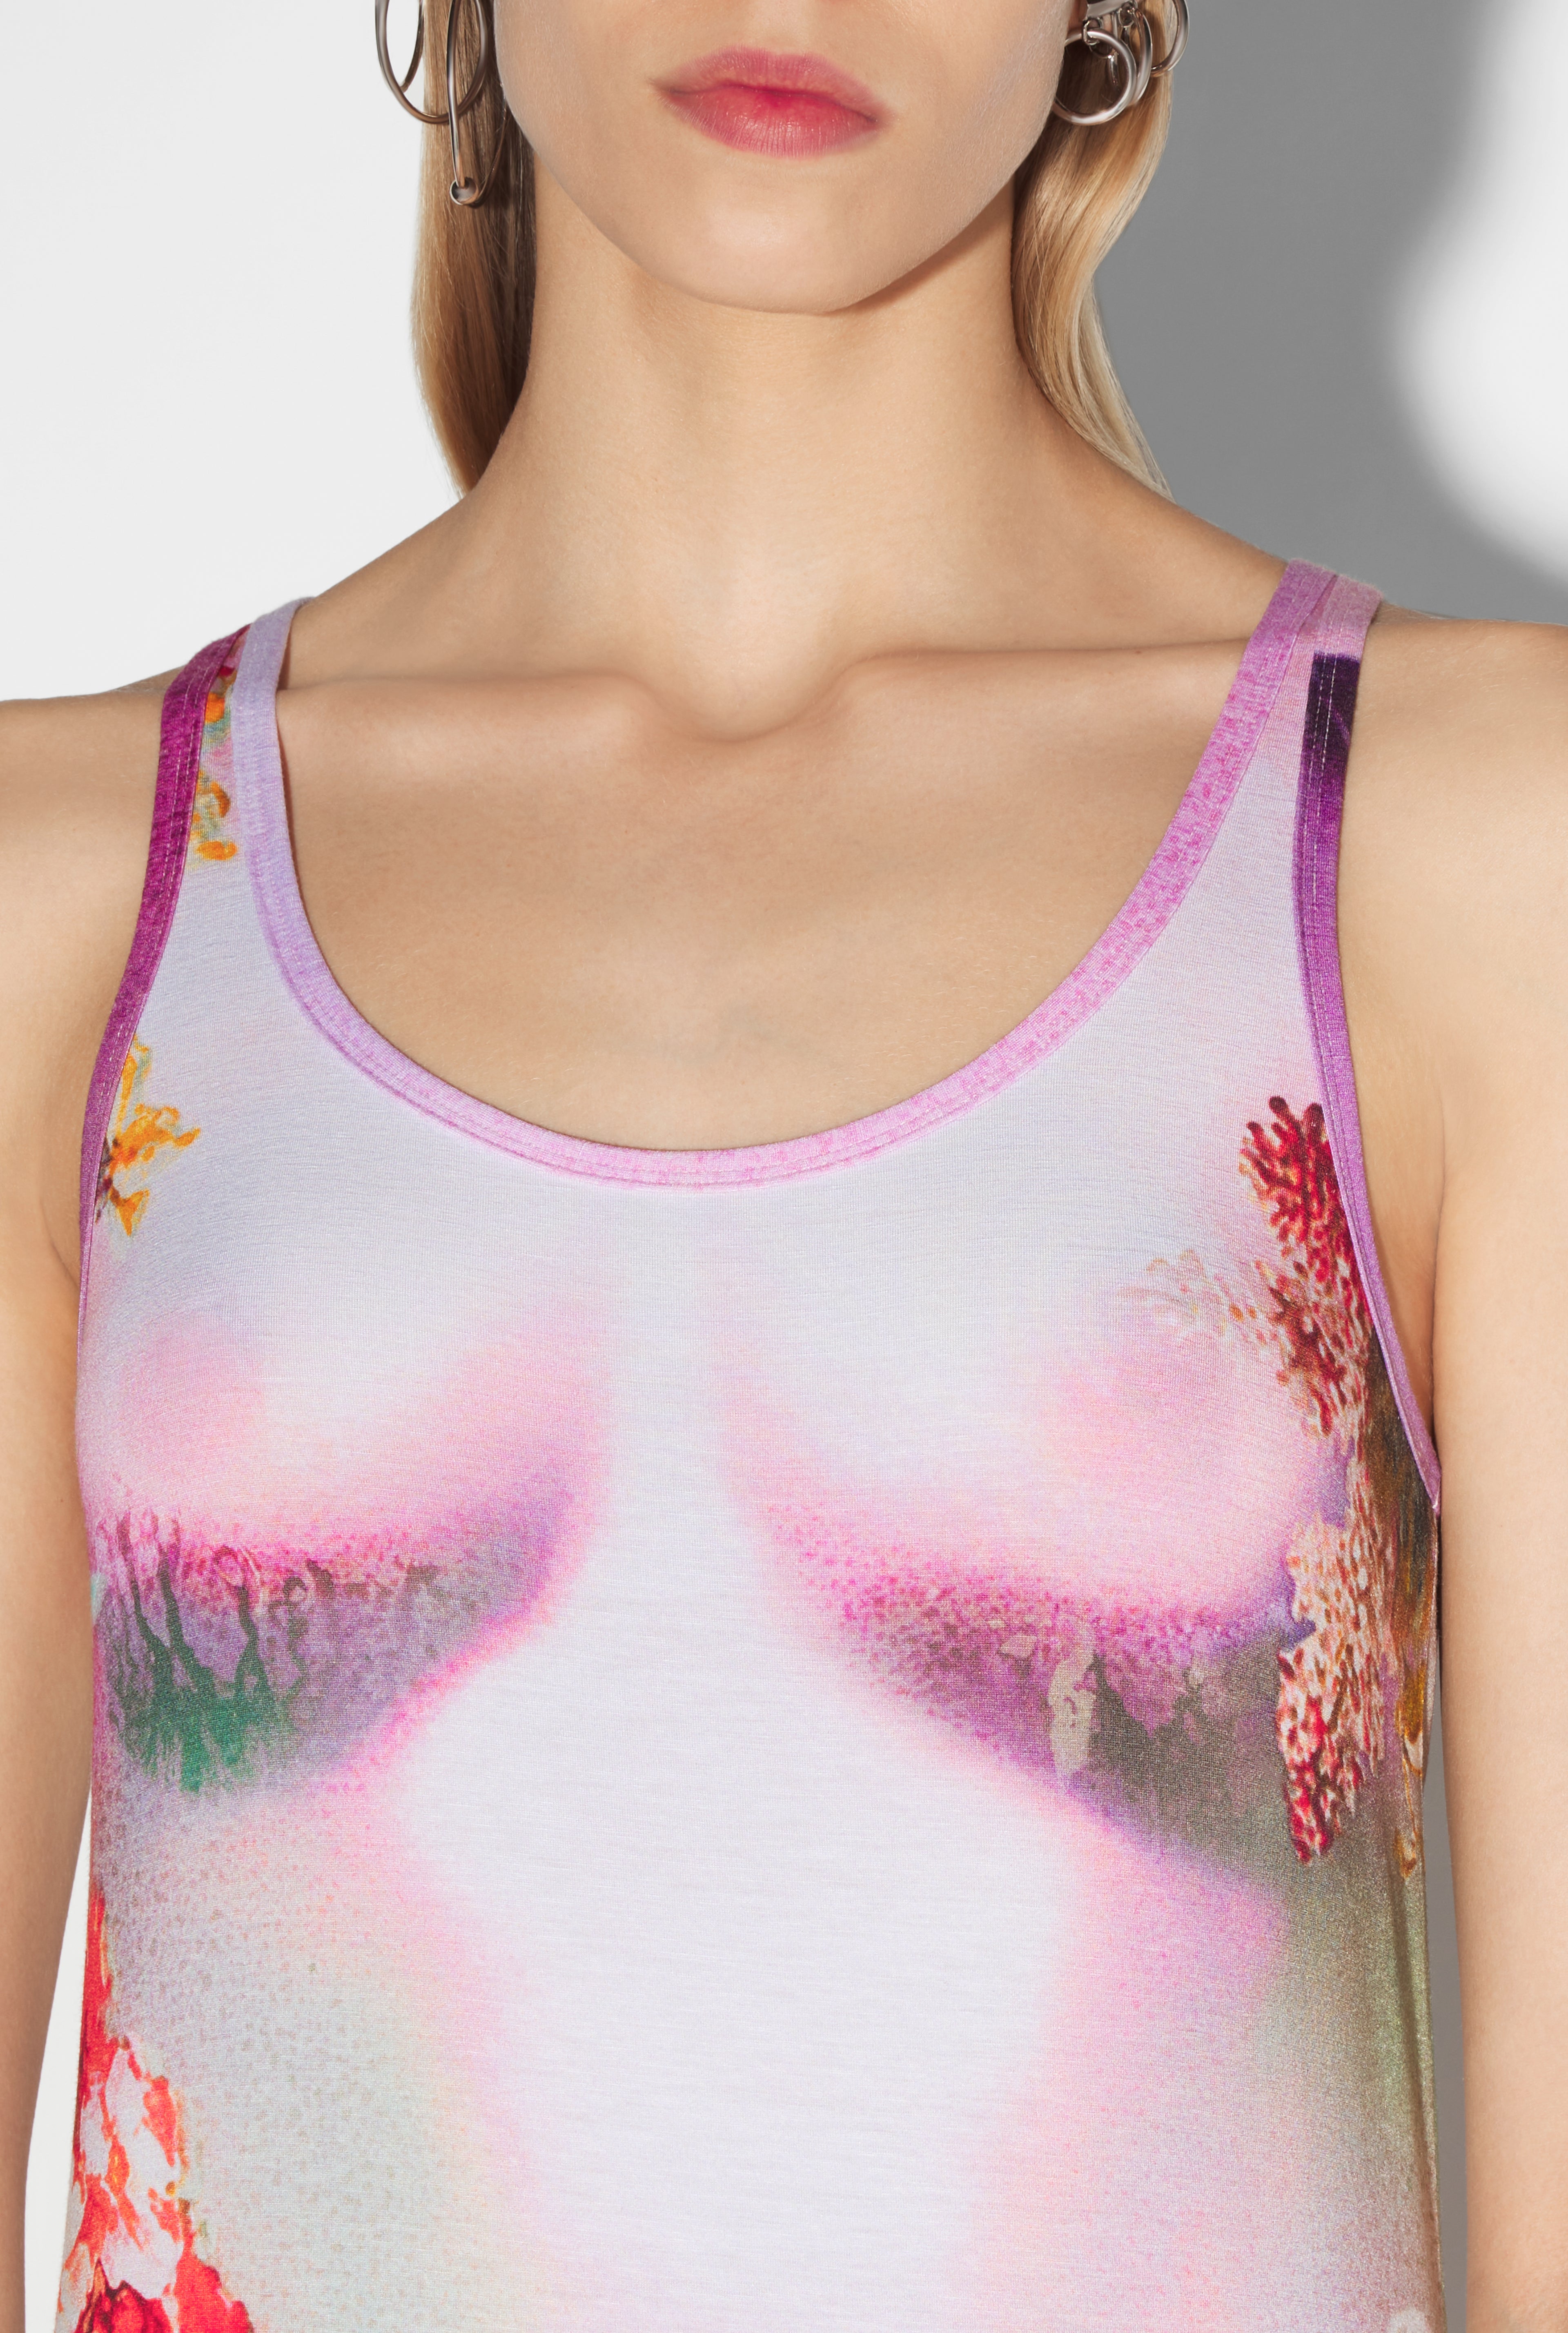 The Pink Body Flower Tank Top